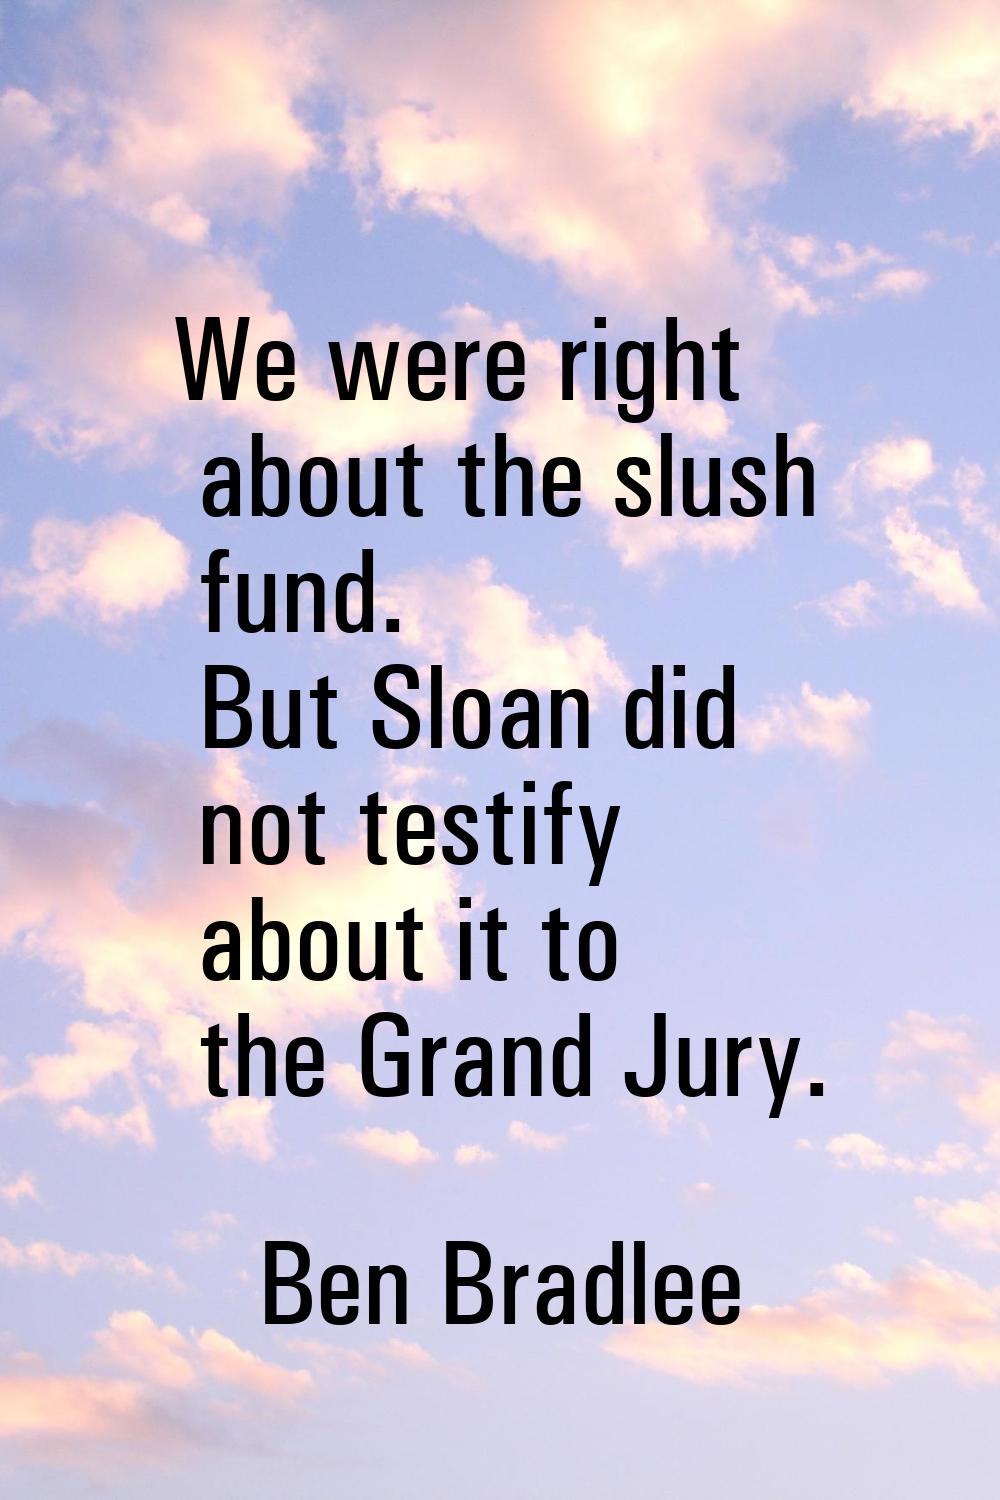 We were right about the slush fund. But Sloan did not testify about it to the Grand Jury.